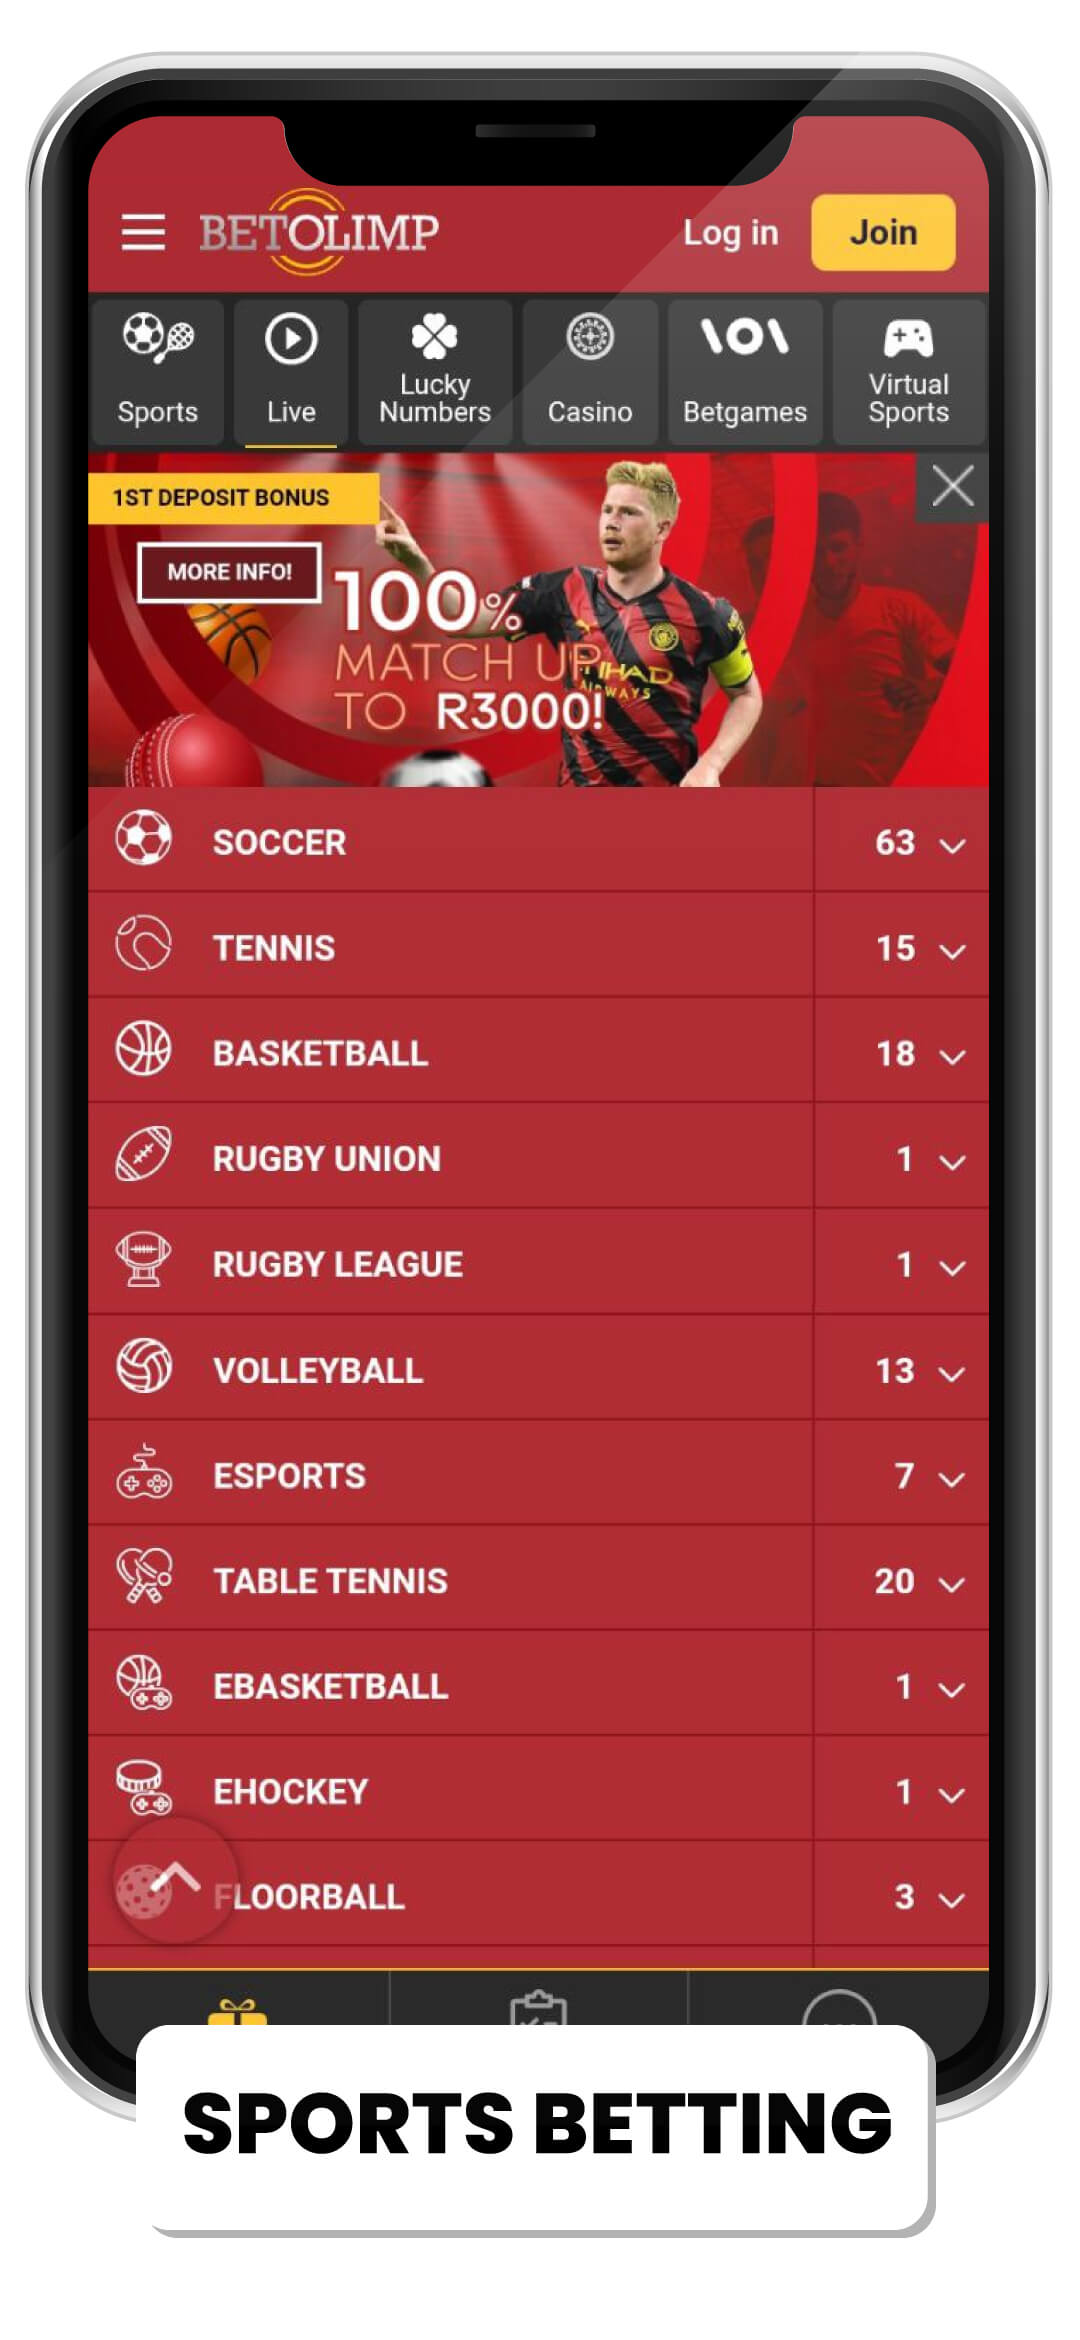 SPORTS BETTING tab at Bet olimp site